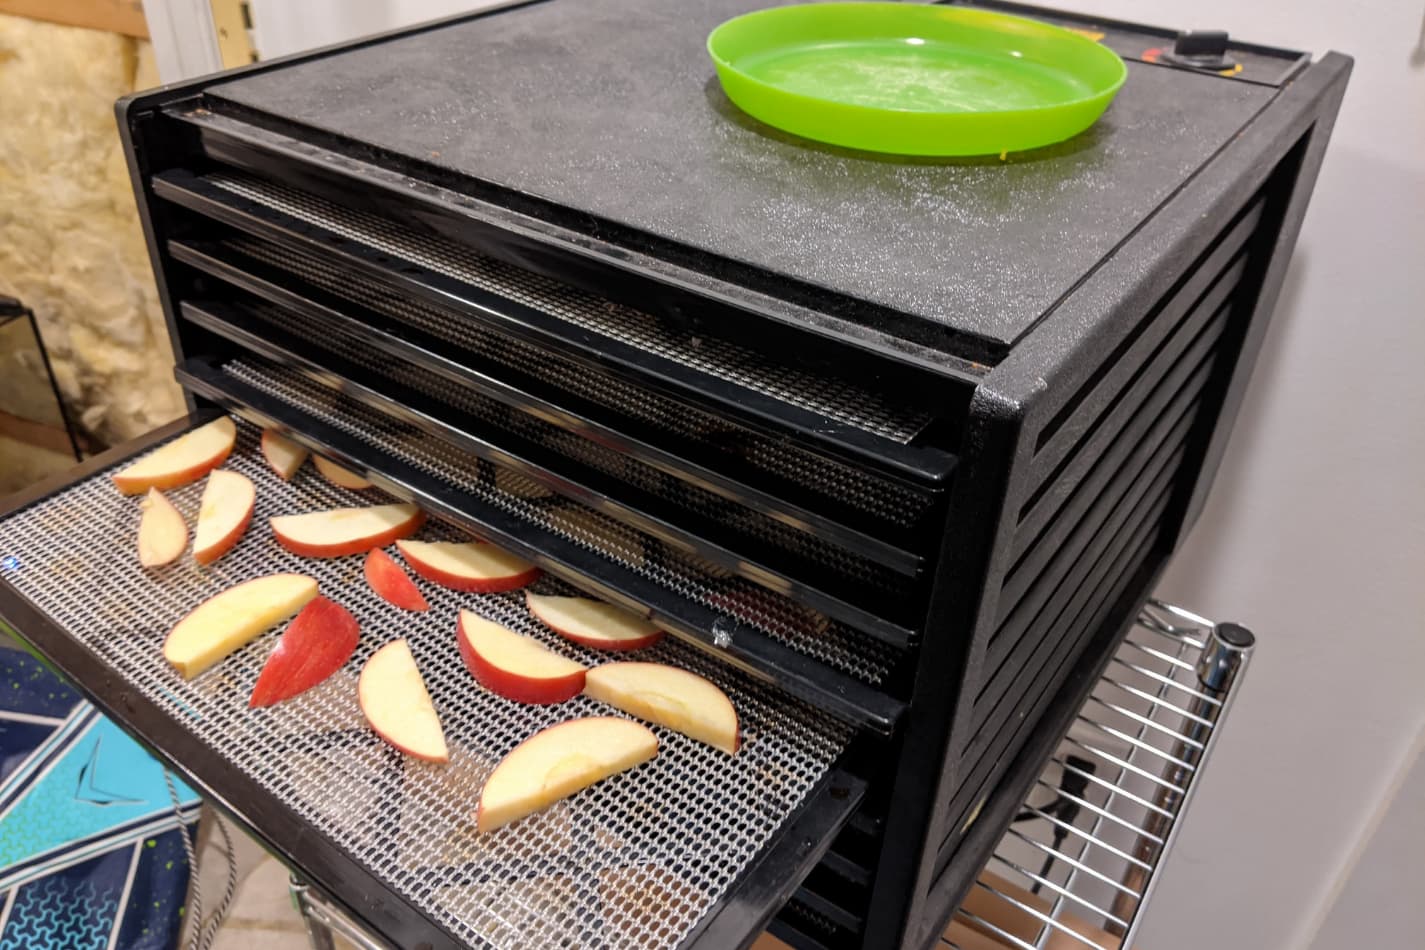 an image of our Excalibur dehydrator running apples